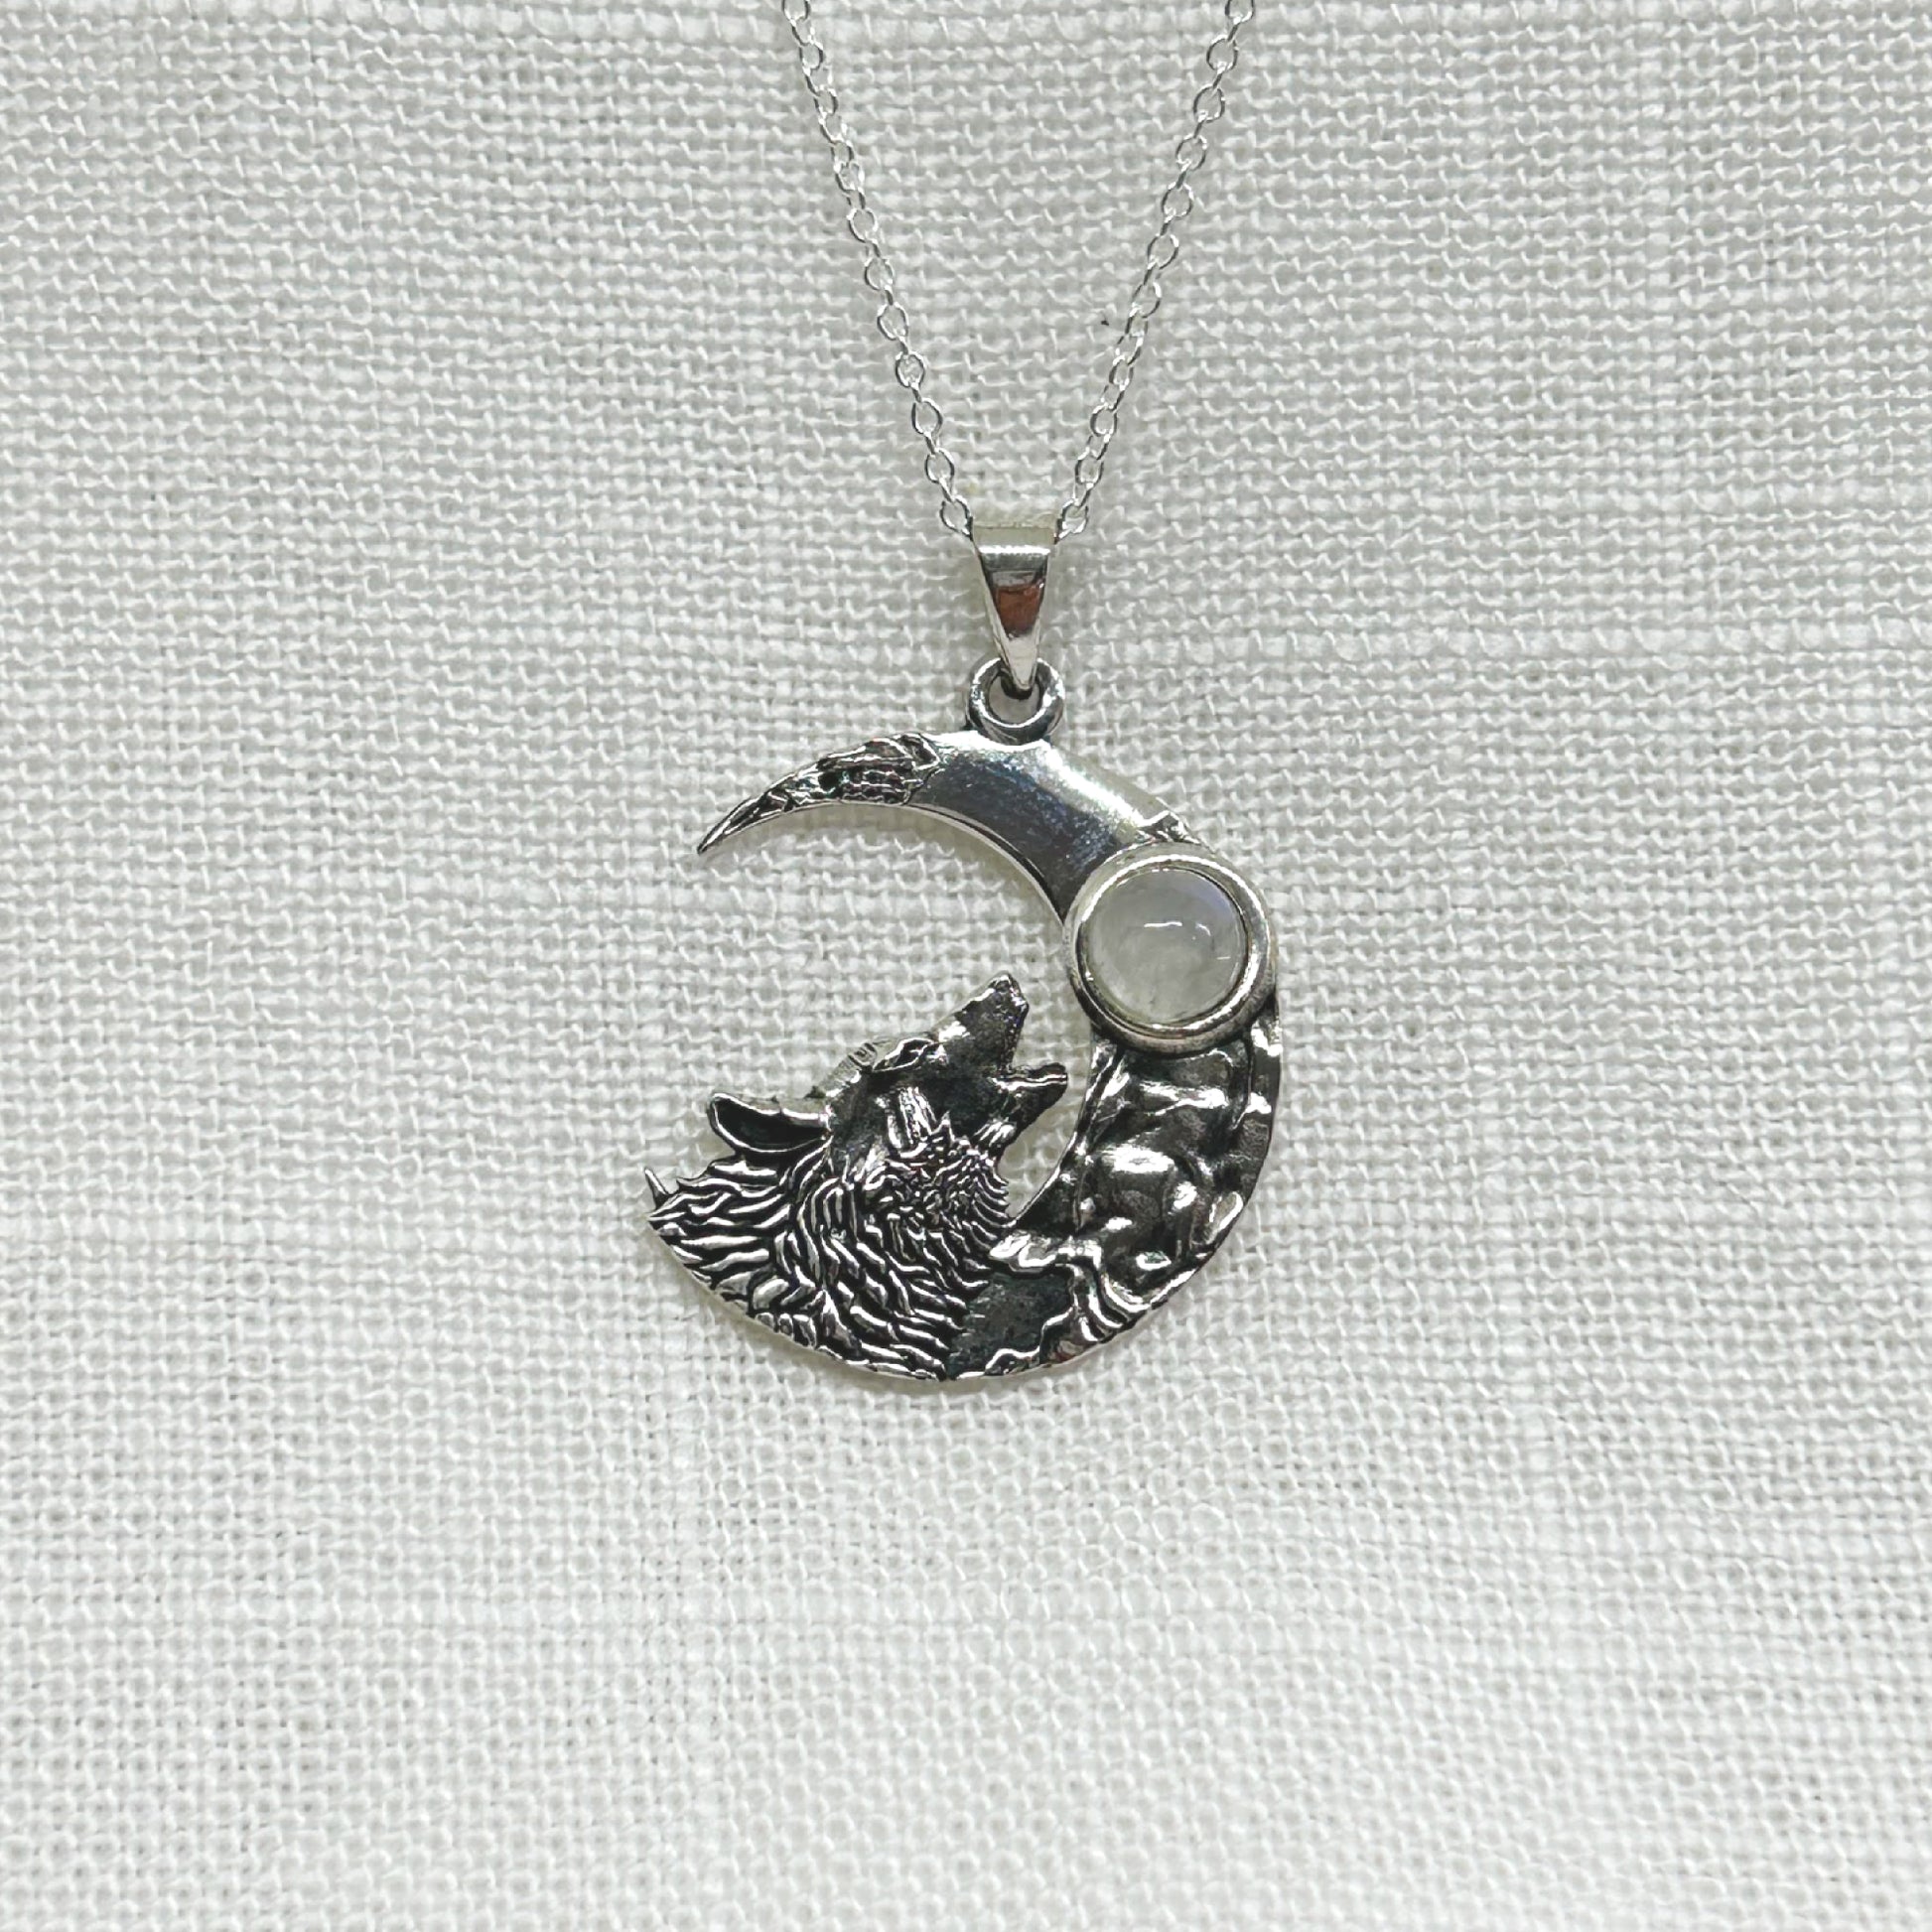 This highly polished silver necklace features a wolf howling at the moon with a rainbow moonstone cabochon. All pendants come supplied on an 20" Sterling Silver Curb Chain and are gift boxed. ﻿Also available with an Amethyst cabochon Size approx: W: 2.3cm x H: 3.3cm including bale